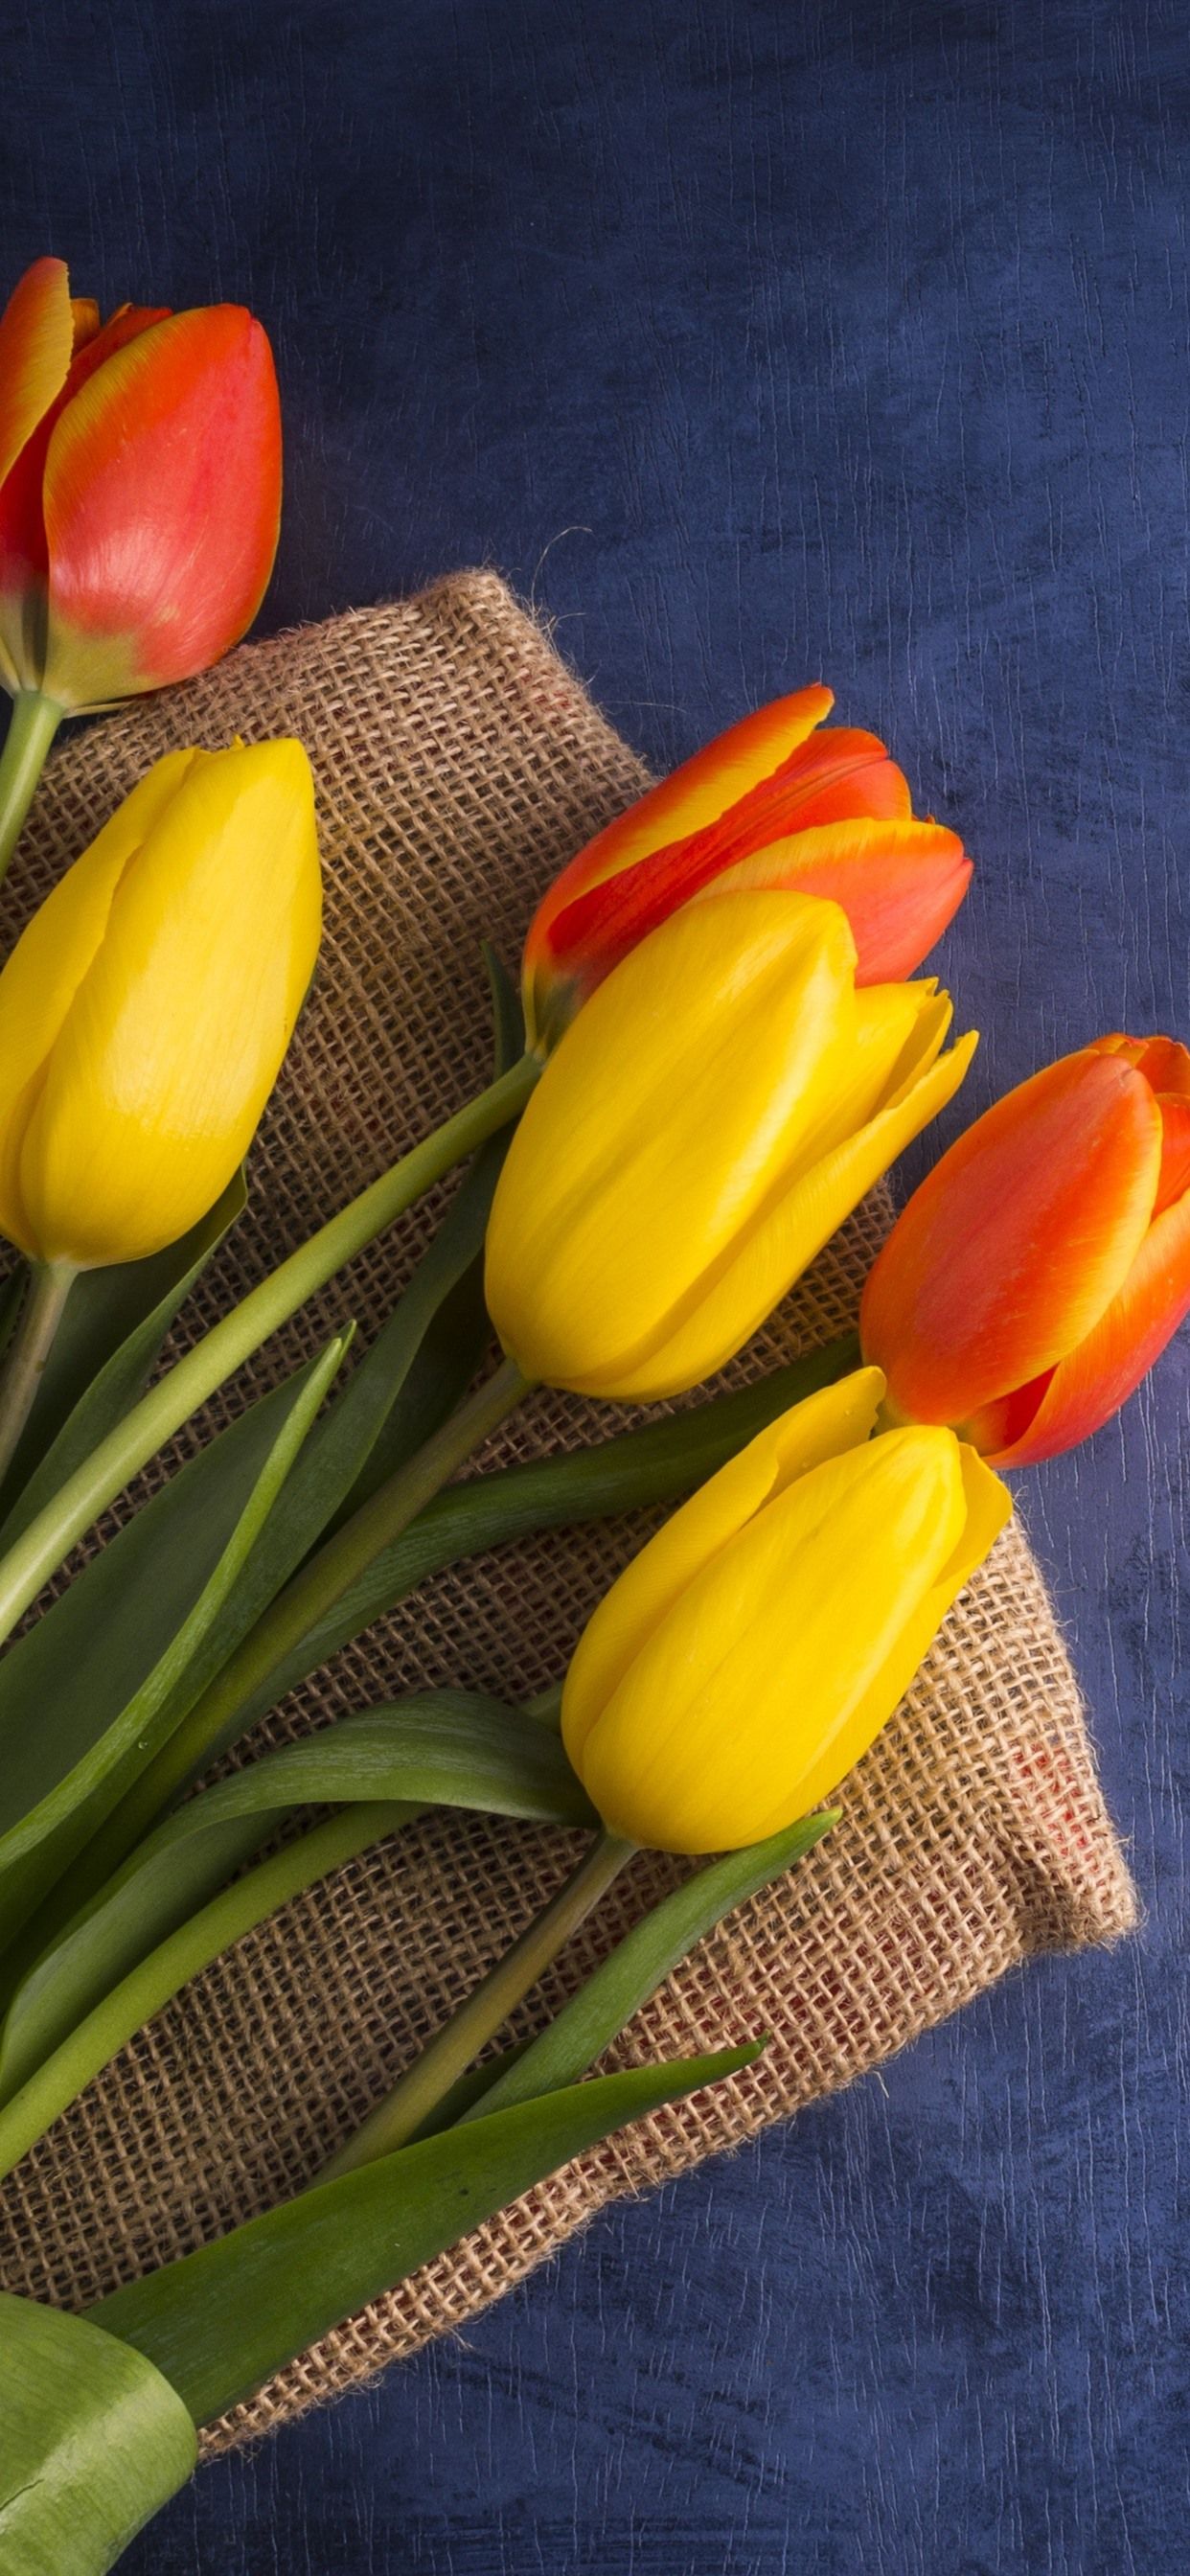 Yellow And Orange Tulips, Bouquet 1242x2688 IPhone 11 Pro XS Max Wallpaper, Background, Picture, Image